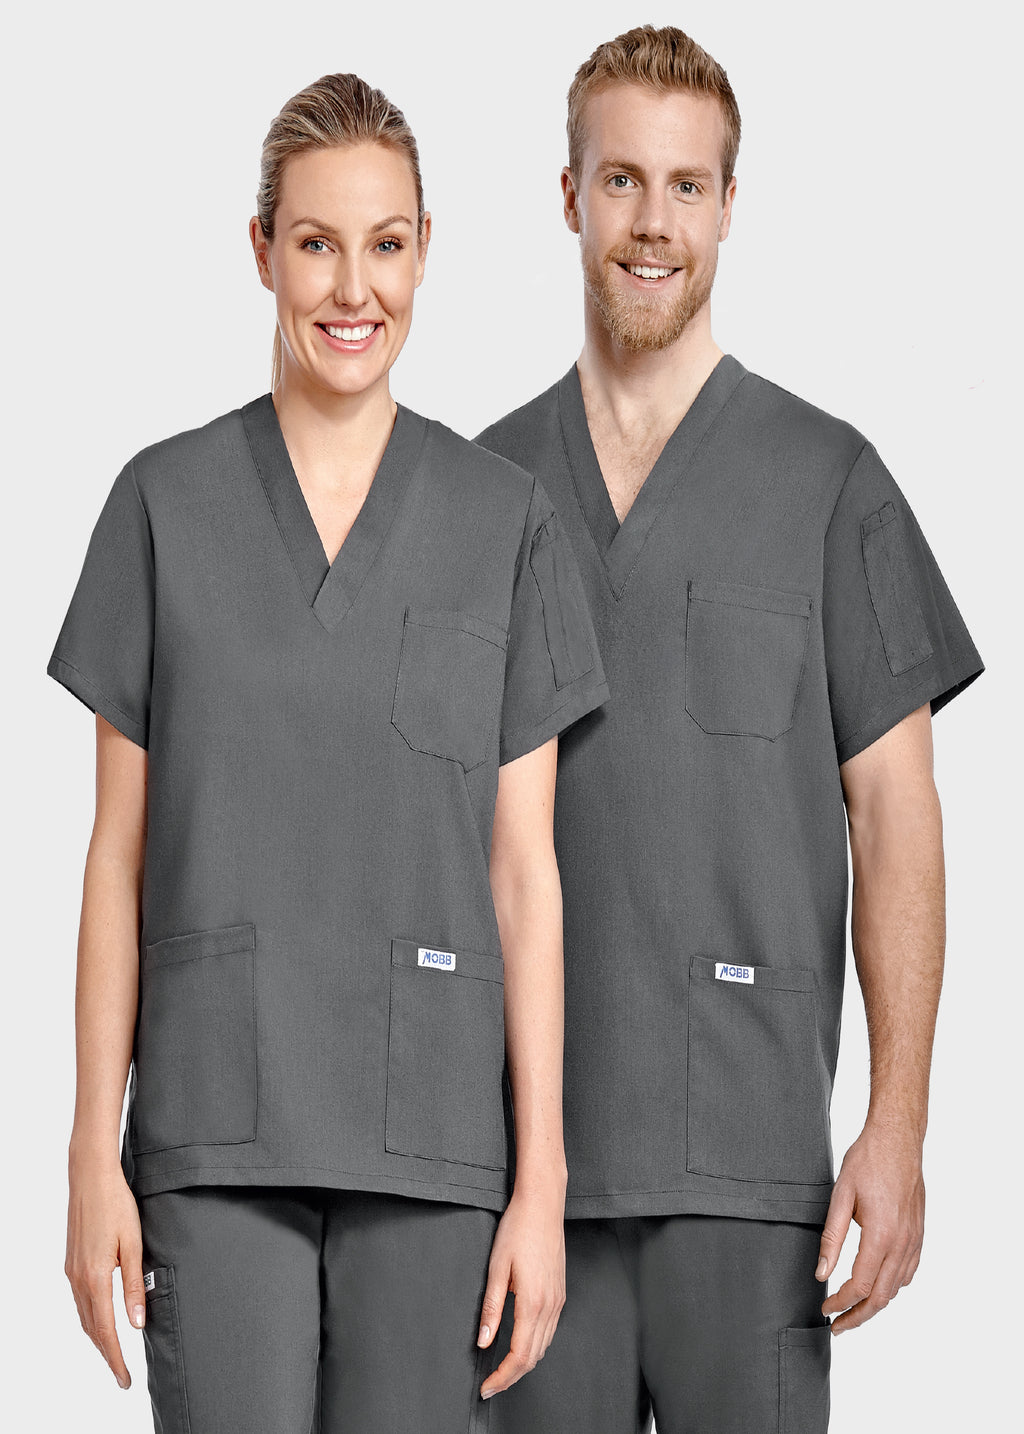 Product - Unisex MOBB Scrub Set for Ultimate Comfort